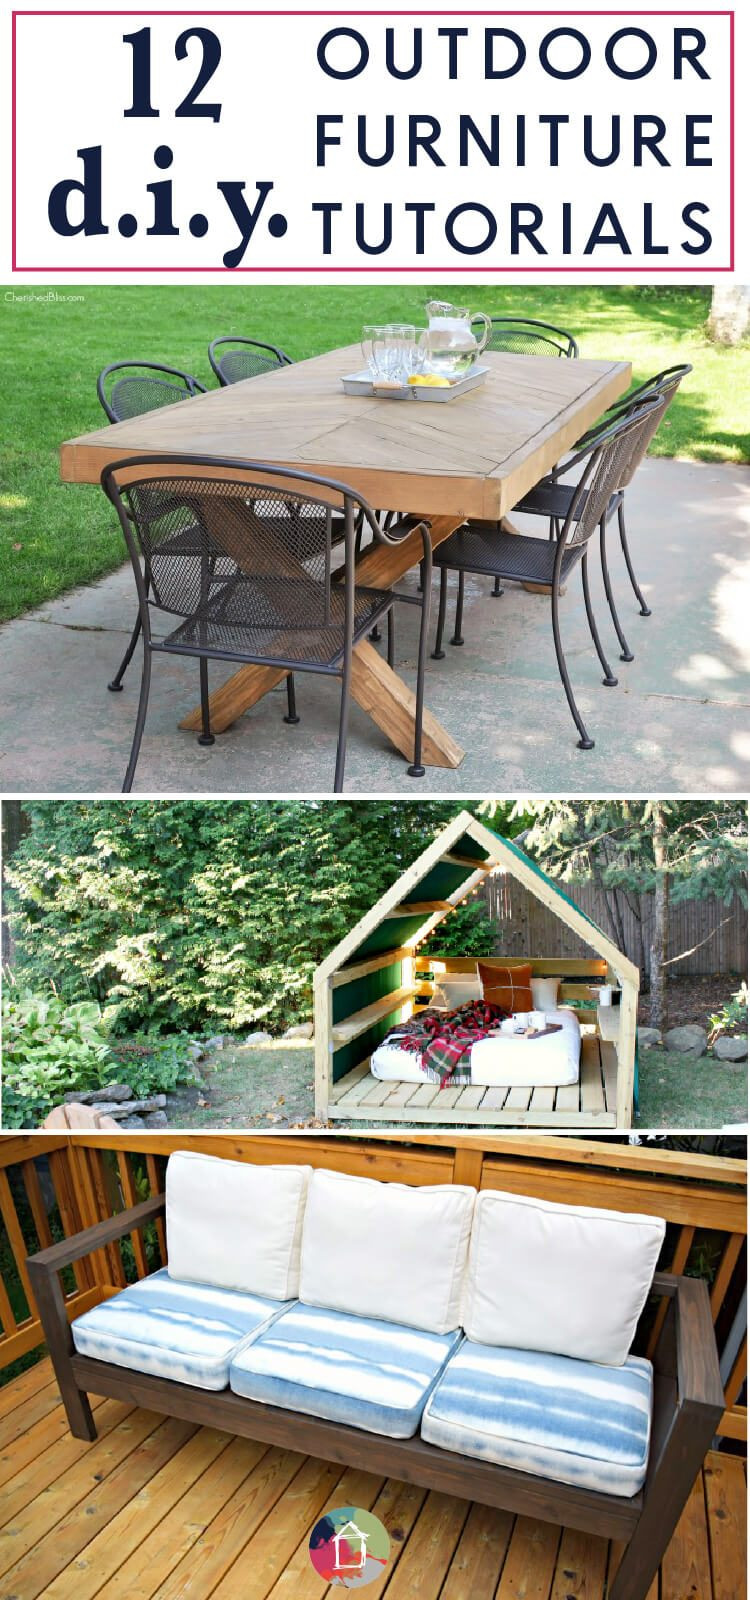 DIY Outdoor Furniture
 DIY Outdoor Furniture Creative & Affordable Ideas